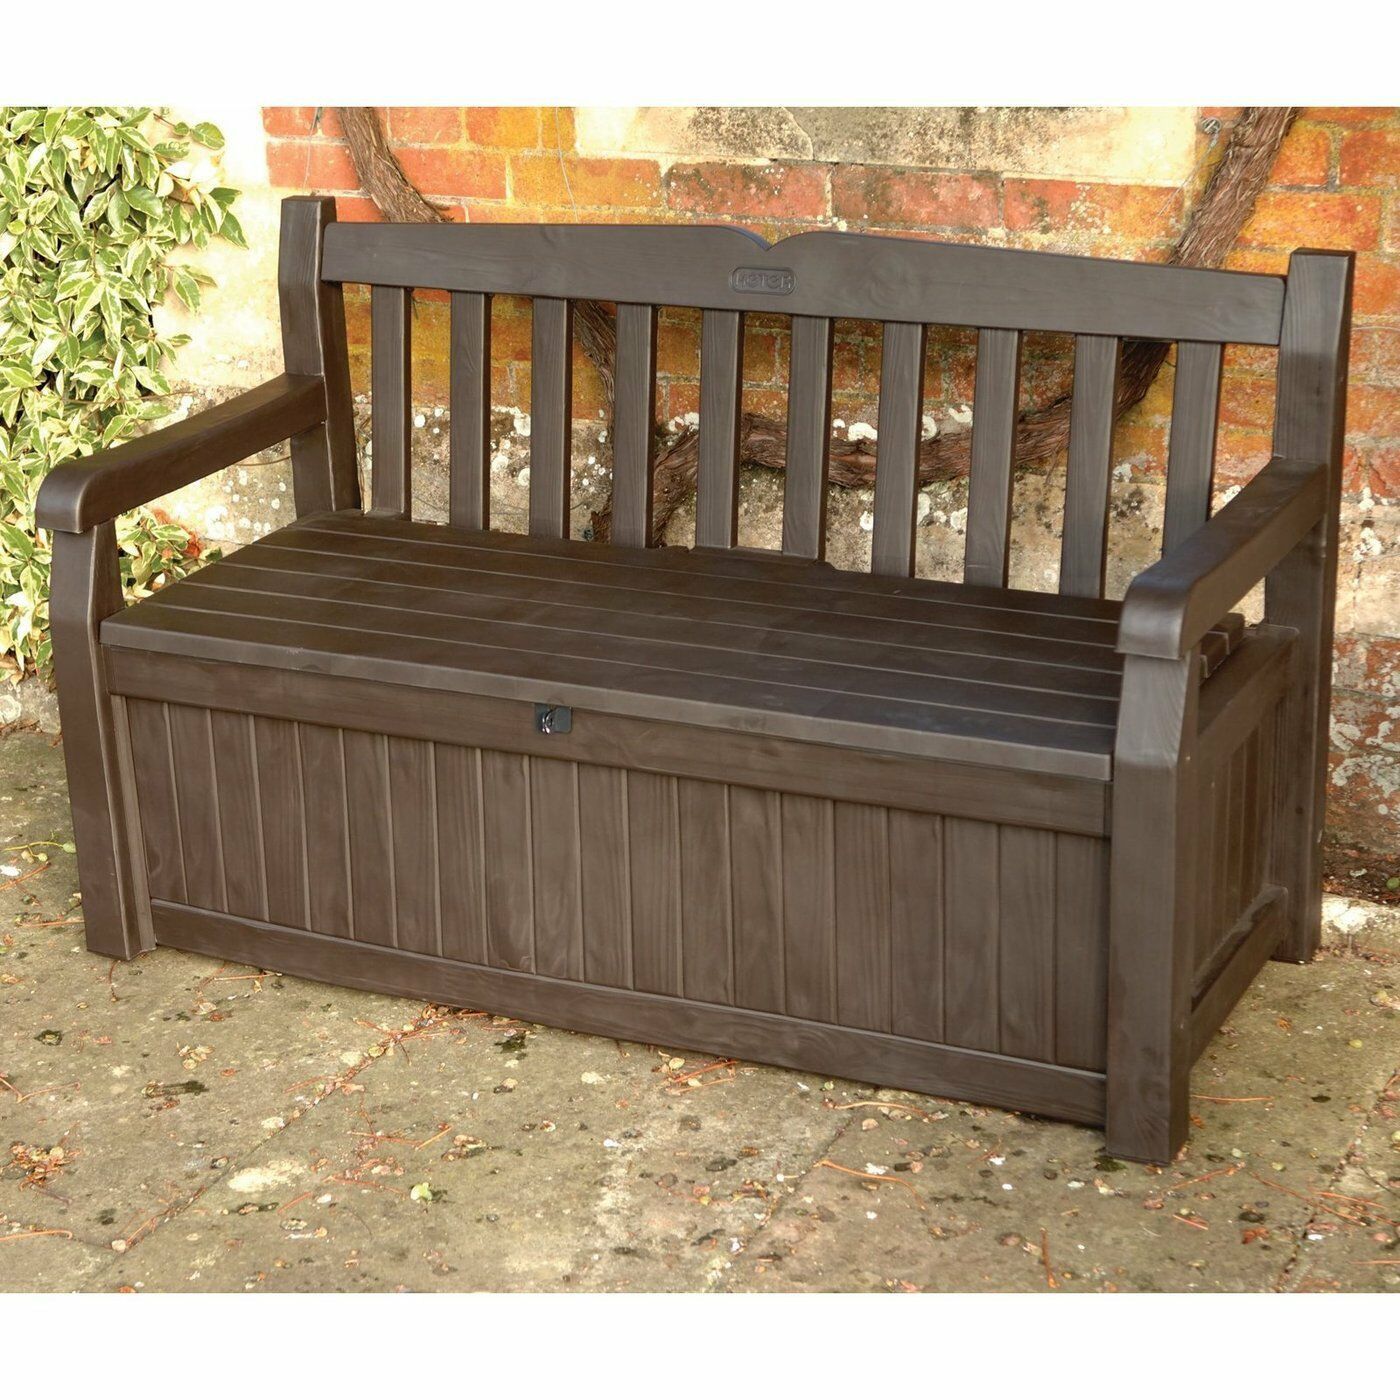 Storage Bench For Outside
 Outdoor Storage Bench Box Patio Deck Brown Pool Garden